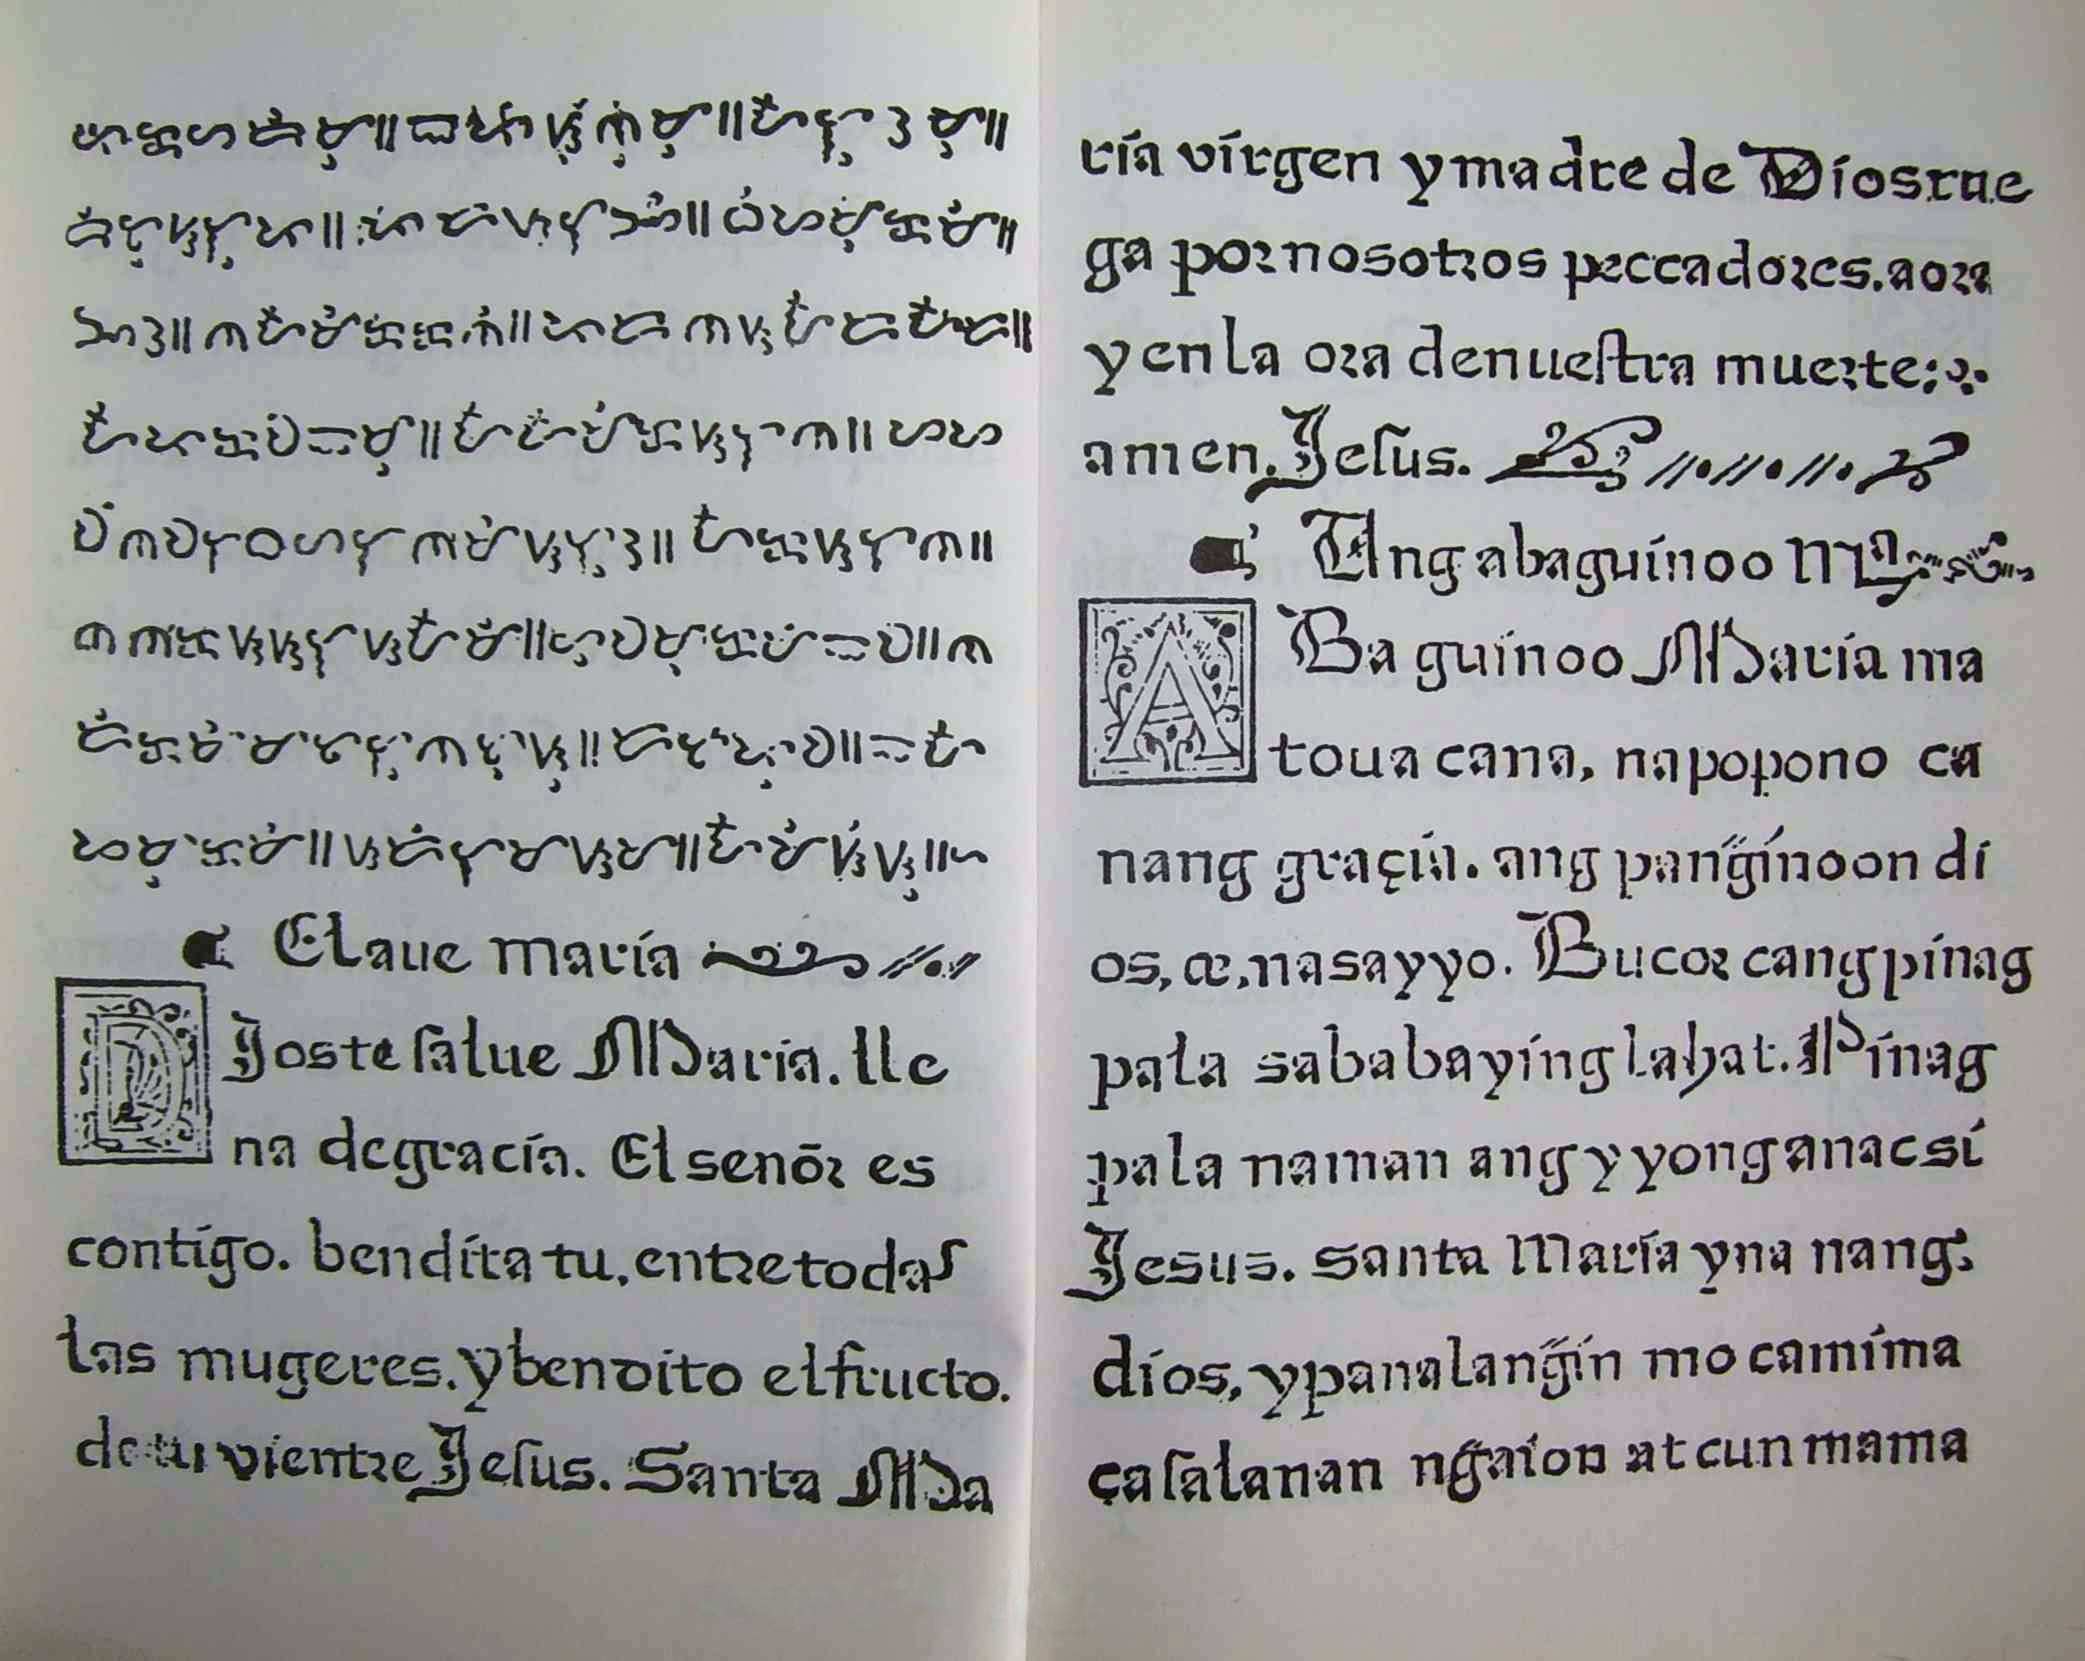 An early Christian book in Spanish and Tagalog (1593) Librum Christianae in Hispanice et Tagalog, anno 1593